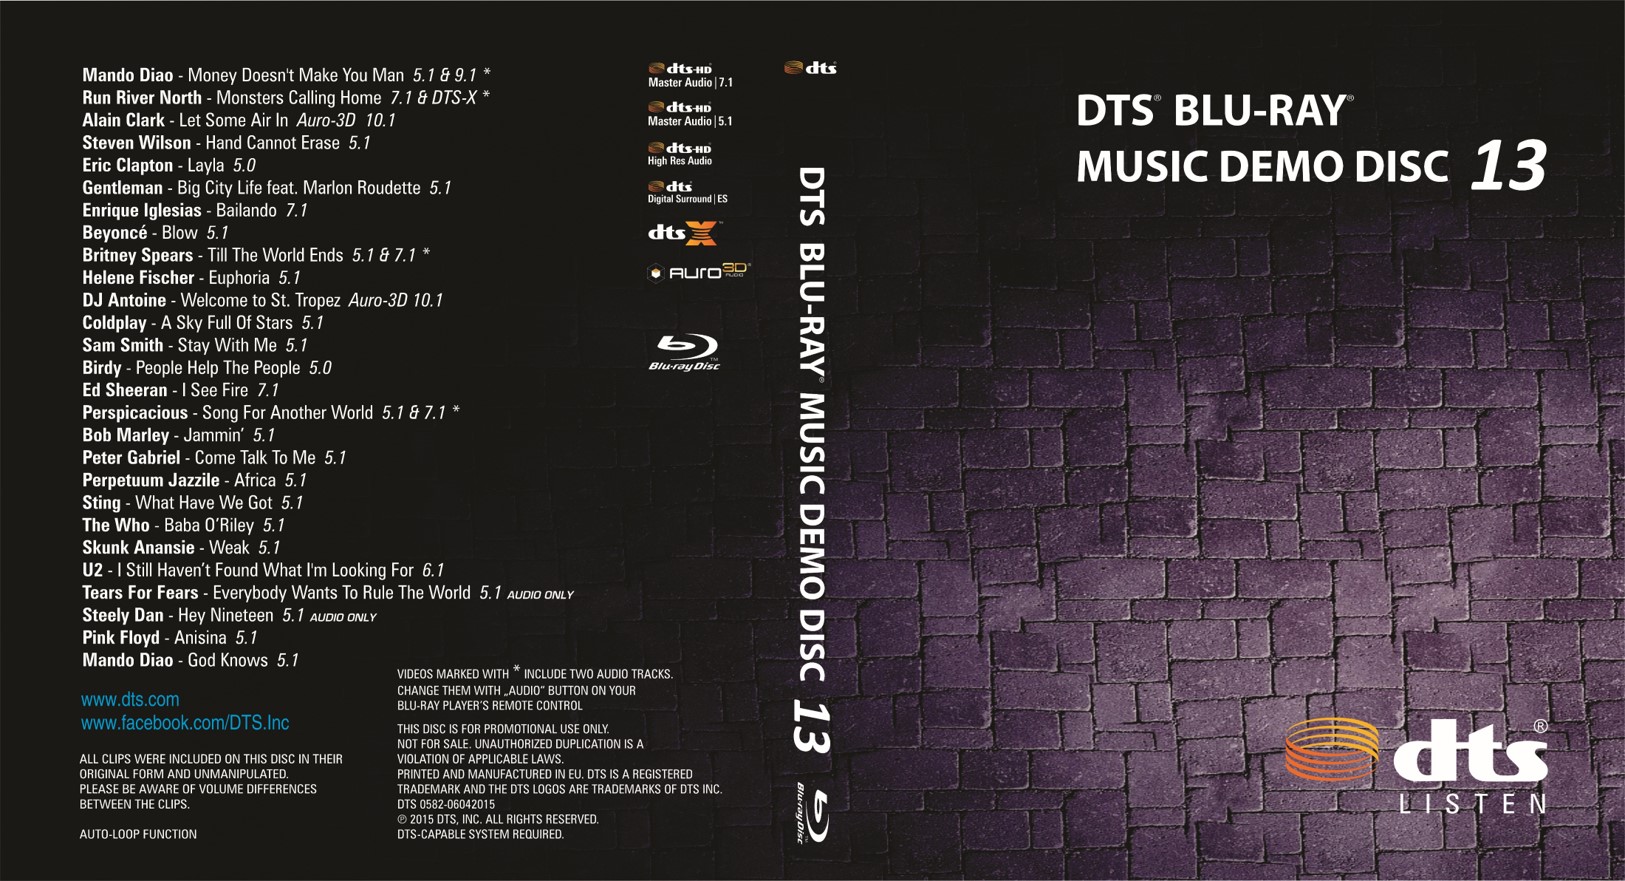 DTS蓝光音乐演示碟 13 2015 DTS Music Demo Disc 13 DTS-X DTX-ES DTS-HDMA 7.1